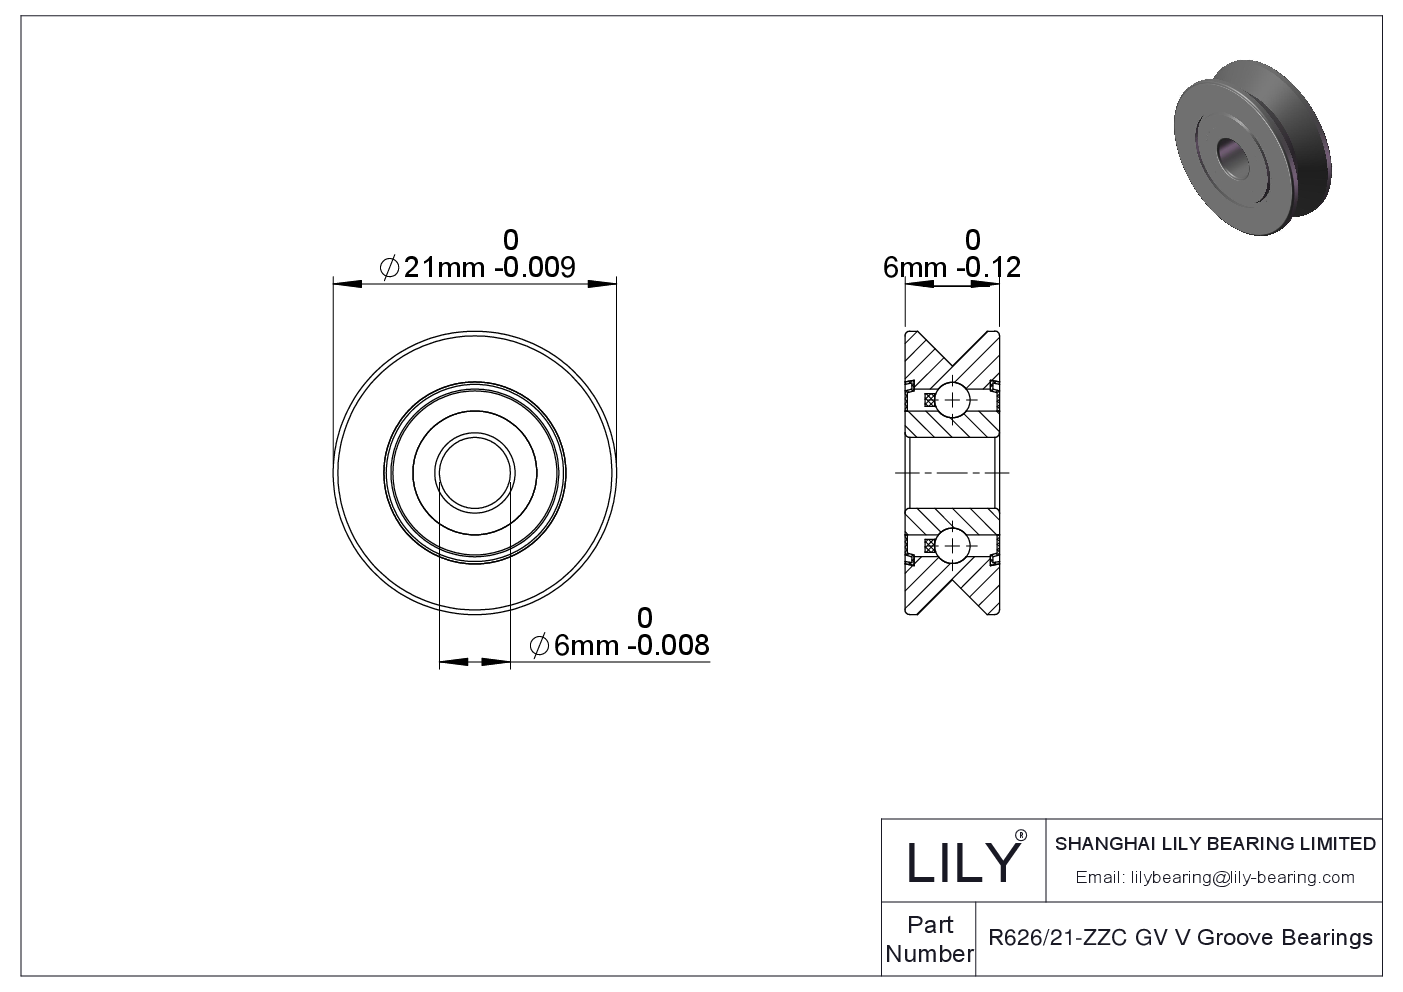 R626/21-ZZC GV V Groove Bearings cad drawing